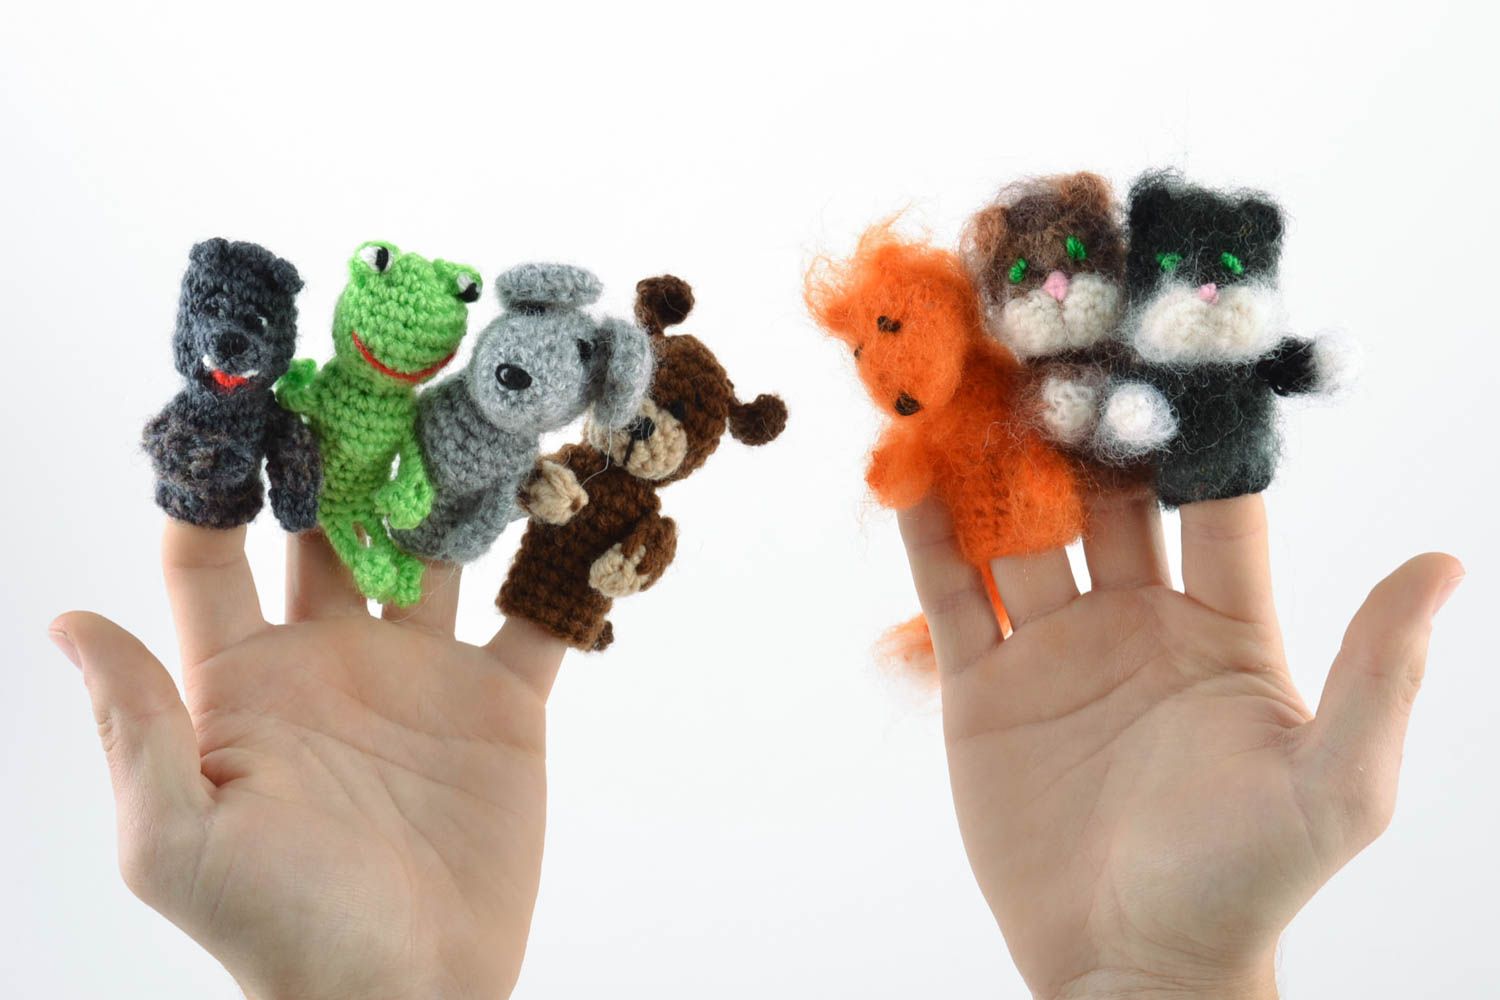 Handmade beautiful finger puppet theatre 7 crocheted toys for children to play photo 2